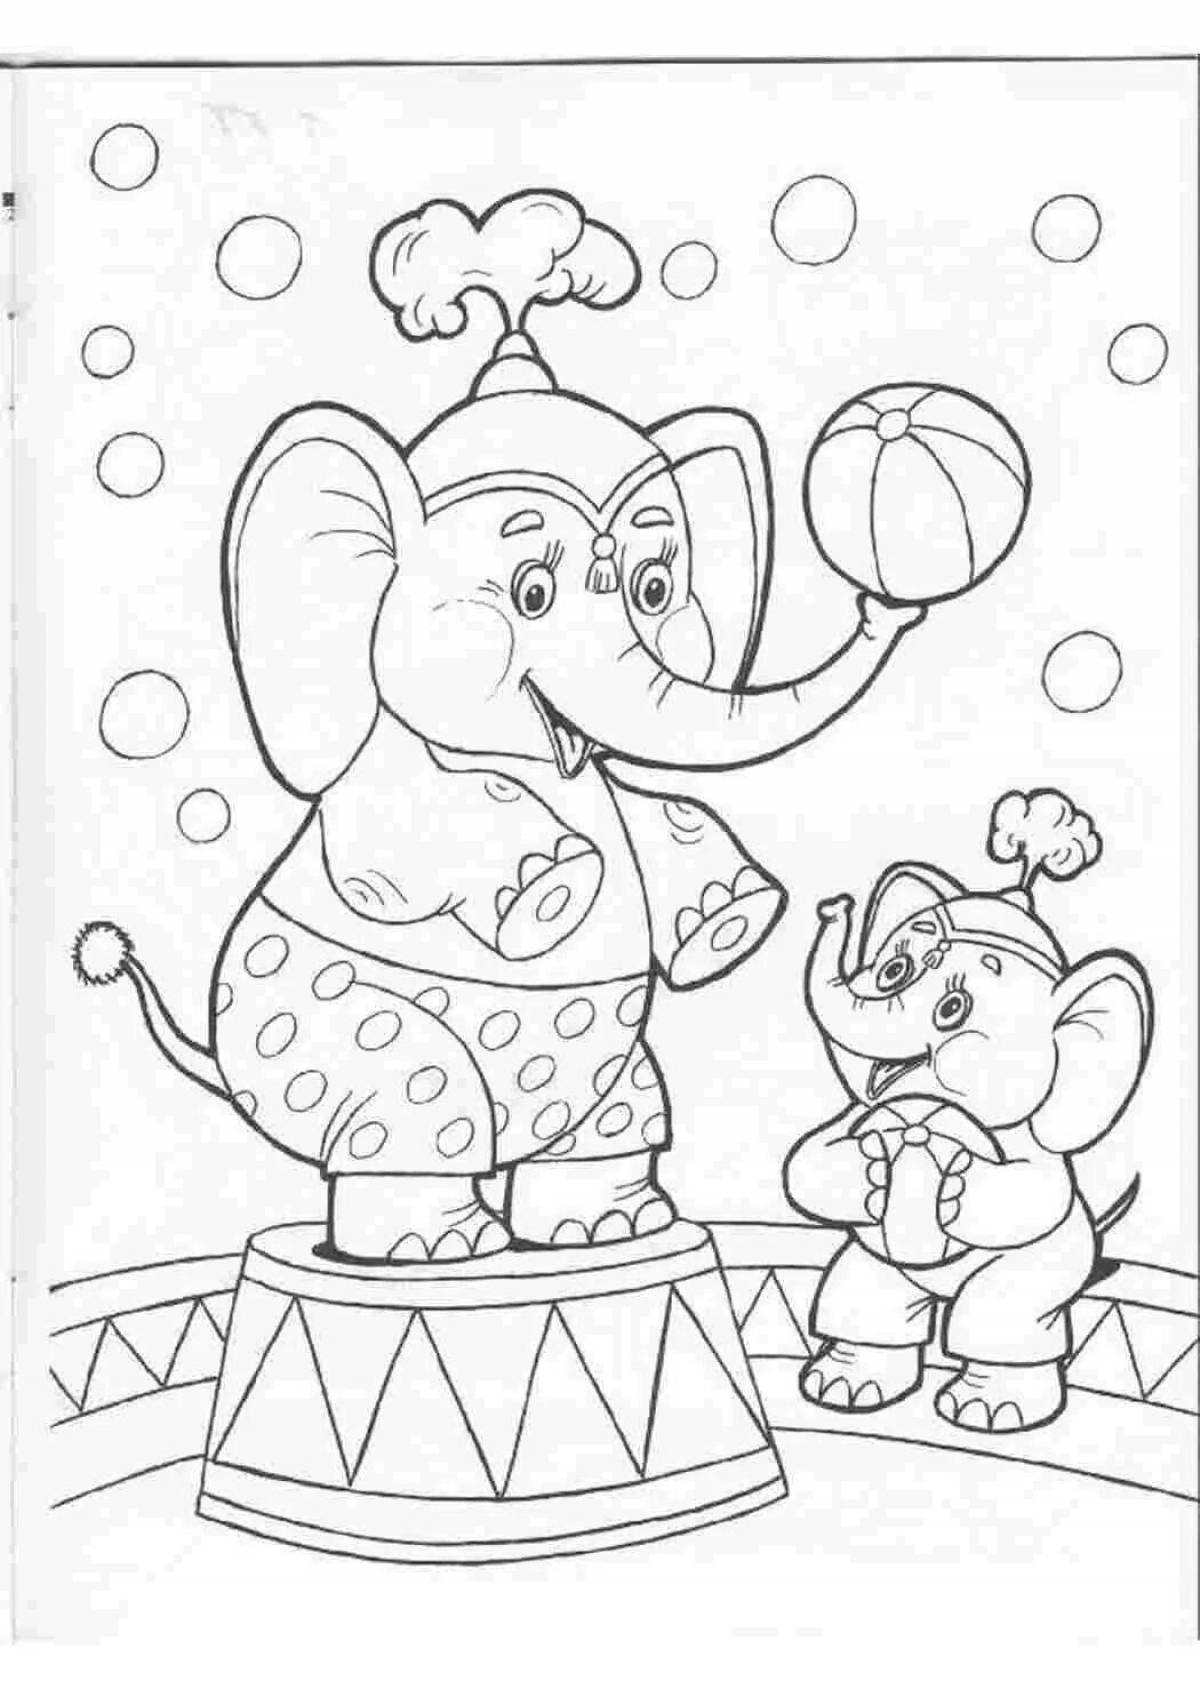 Bright circus coloring book for kids